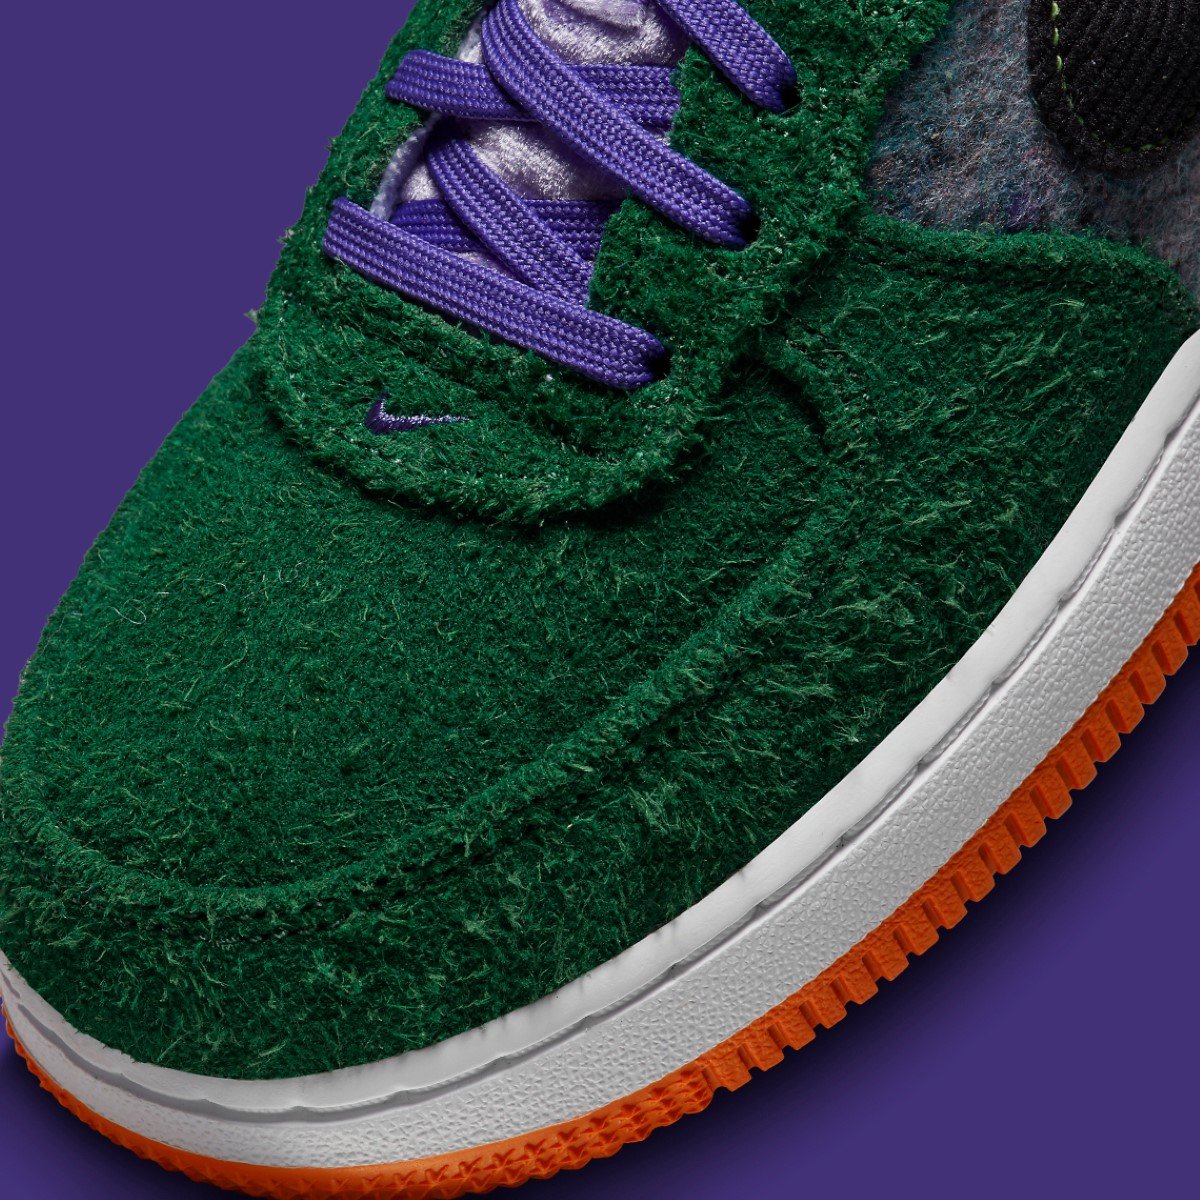 Nike Air Force 1 Low "Shaggy Green"